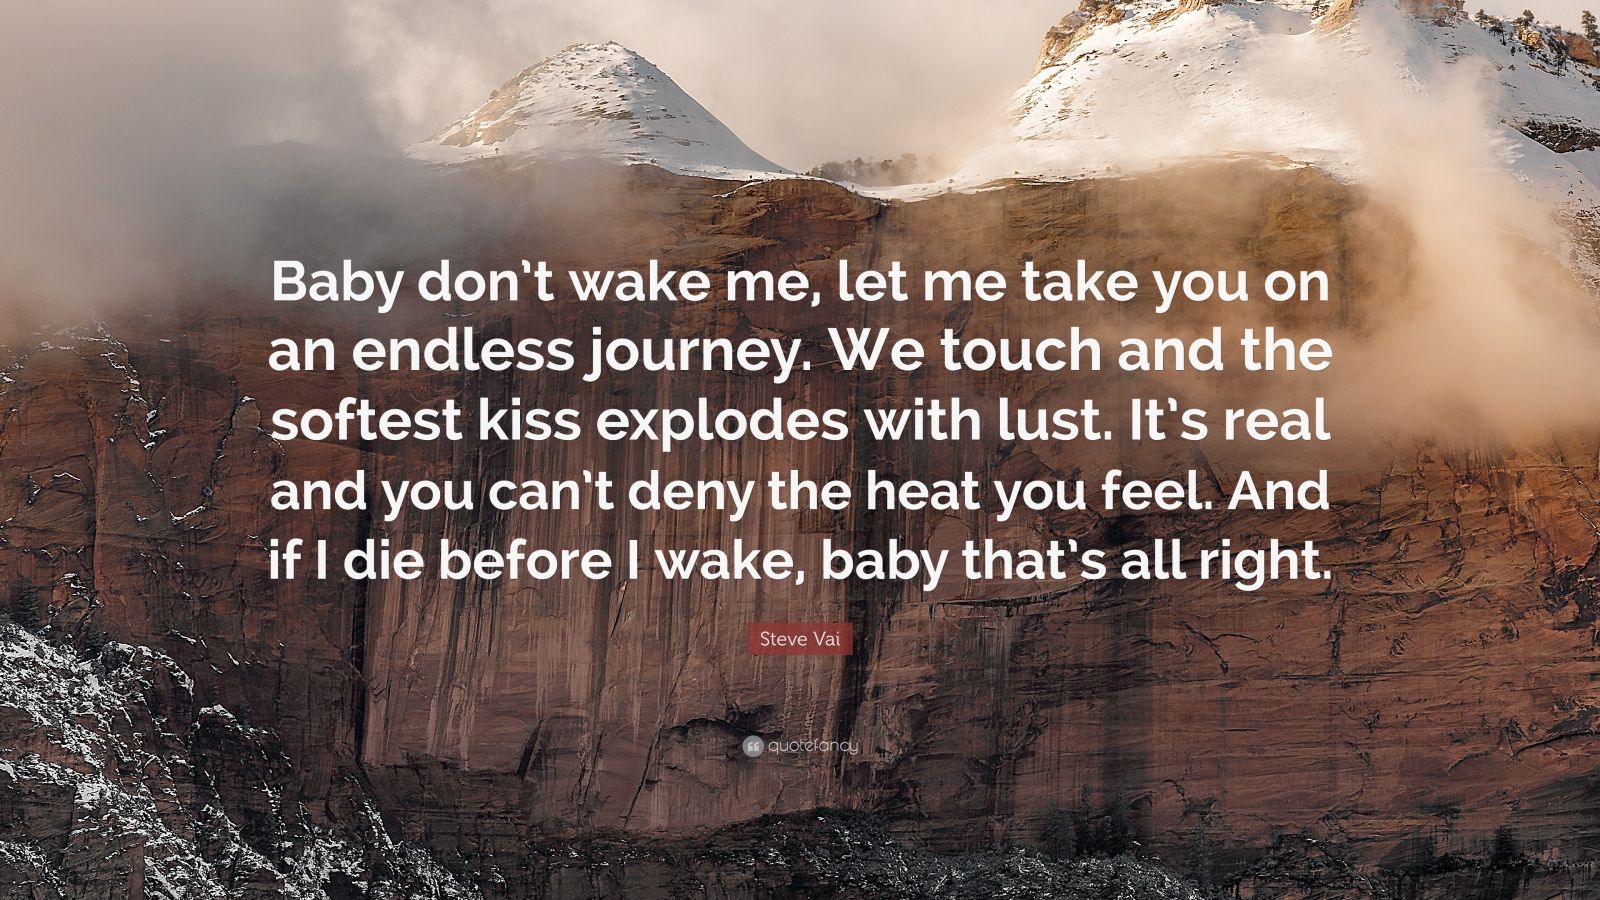 Steve Vai Quote: “Baby don’t wake me, let me take you on an endless ...